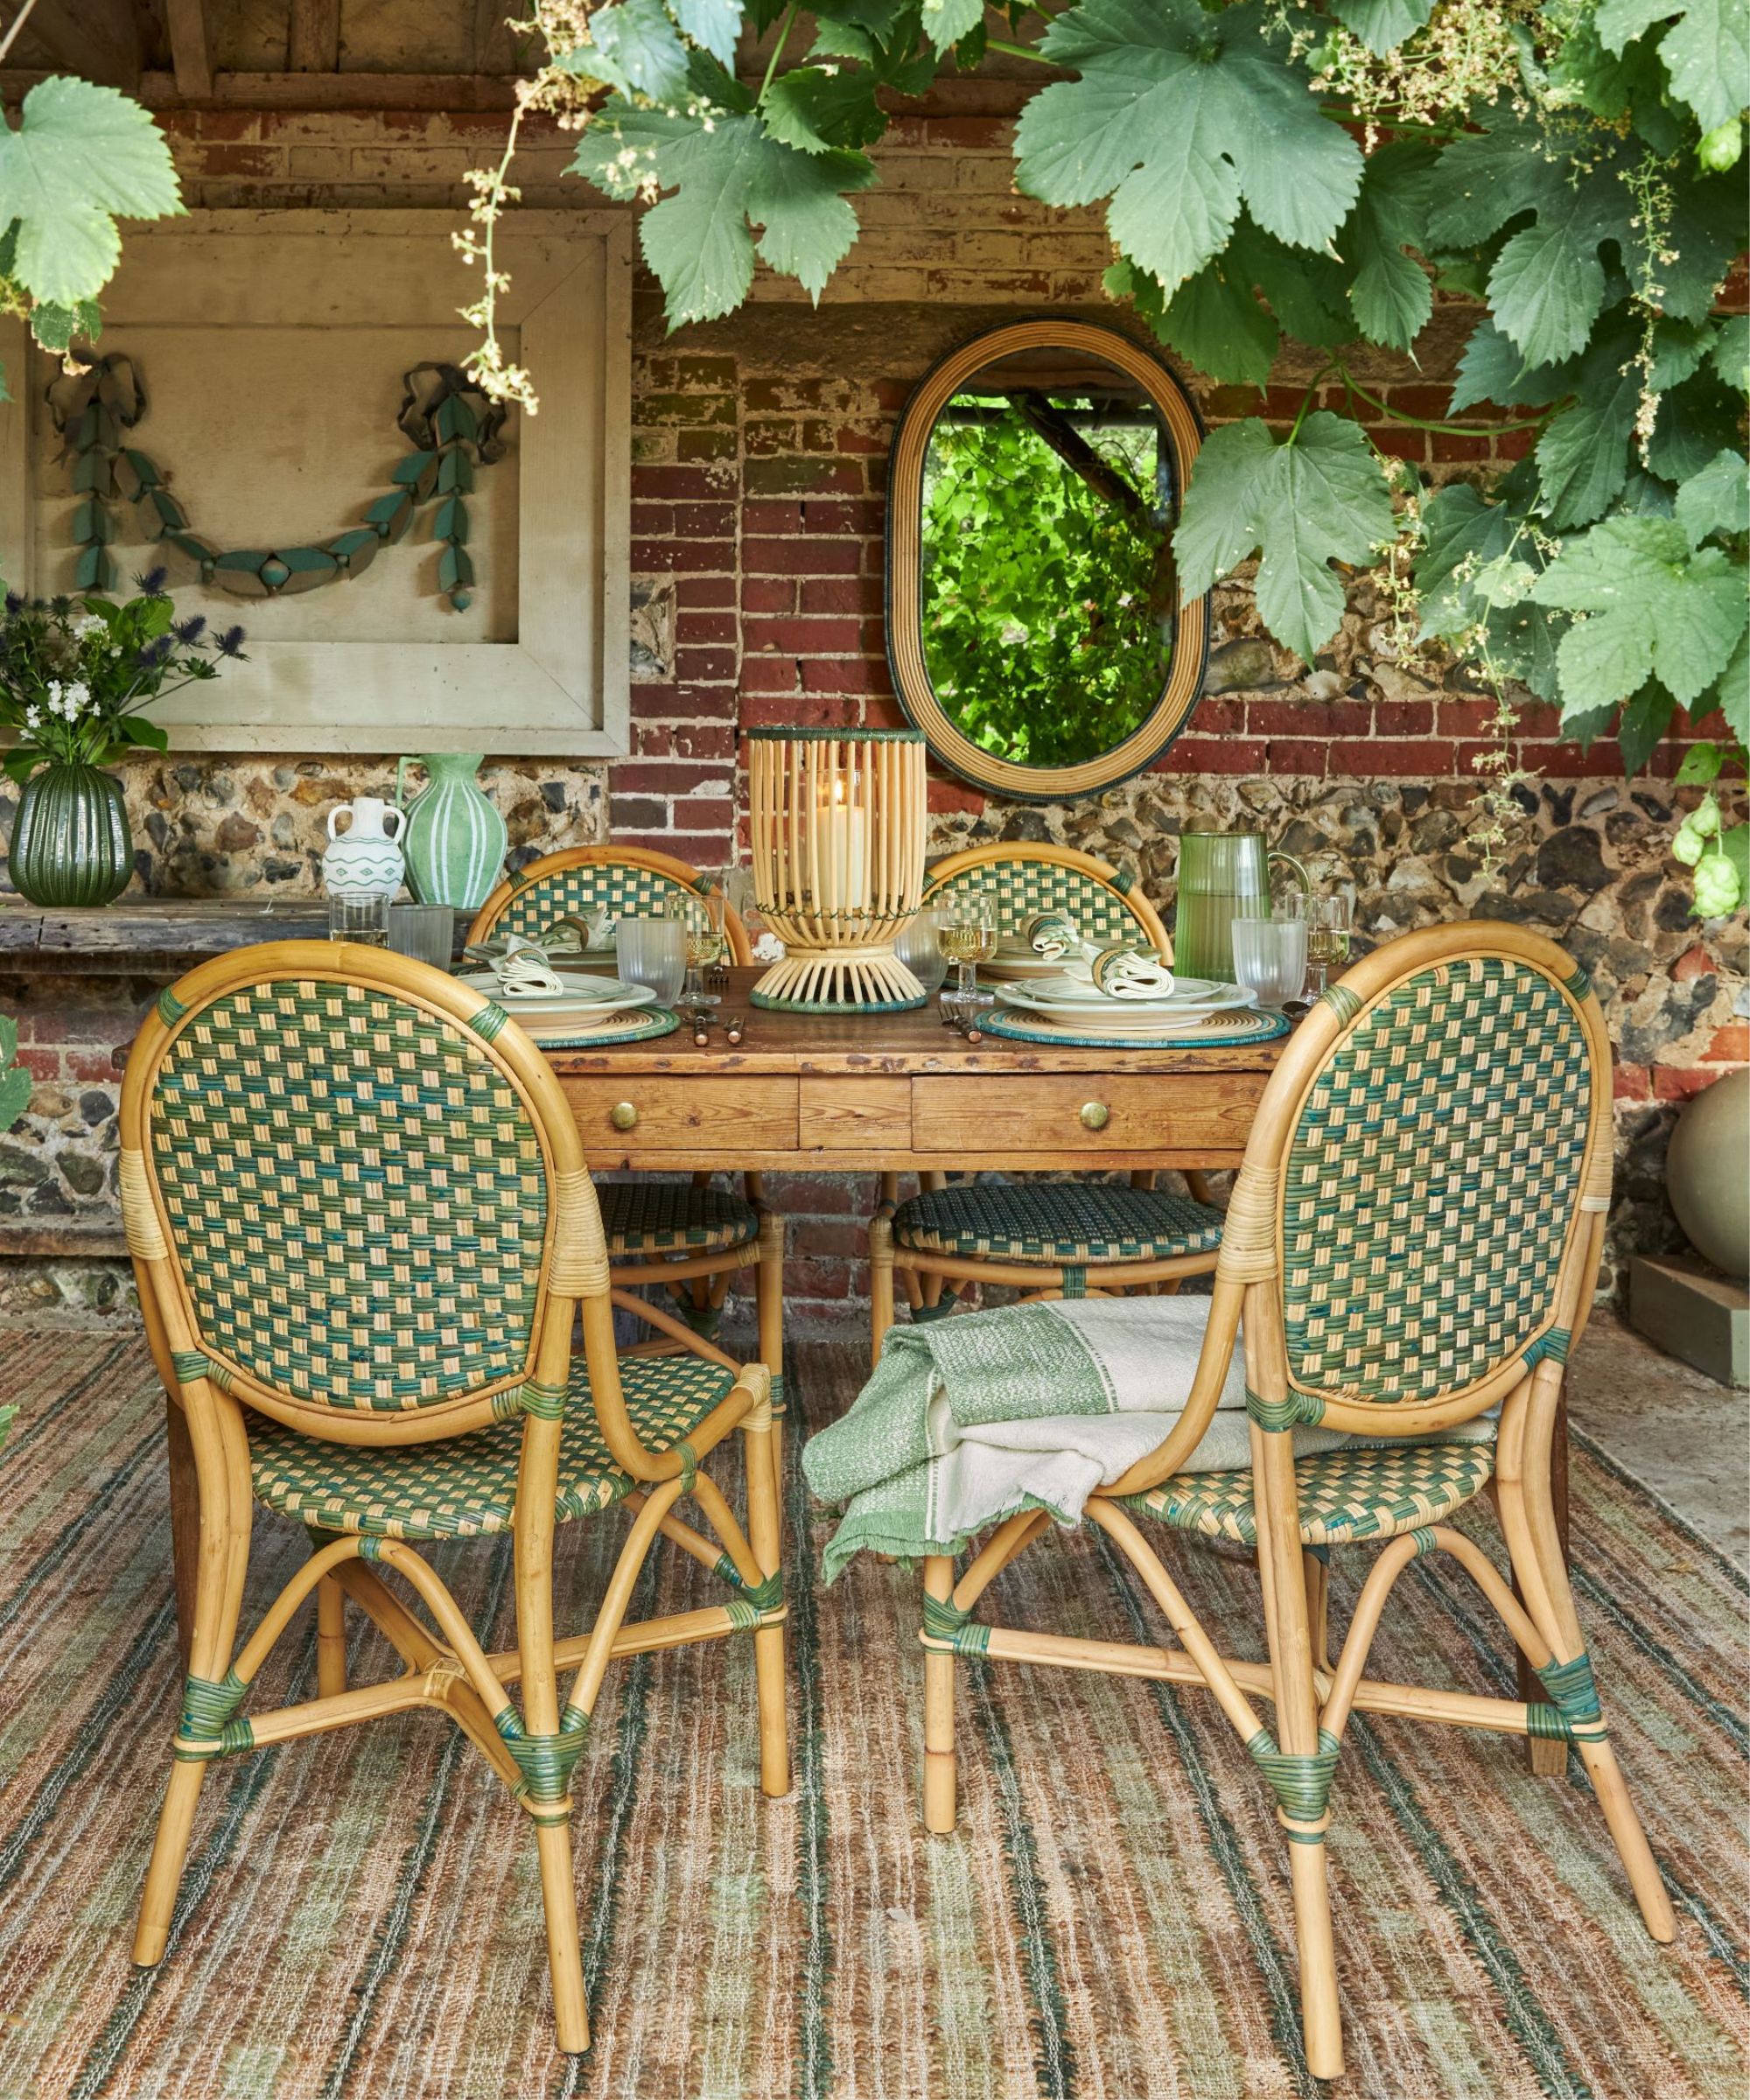 Wooden table with green wicker chairs